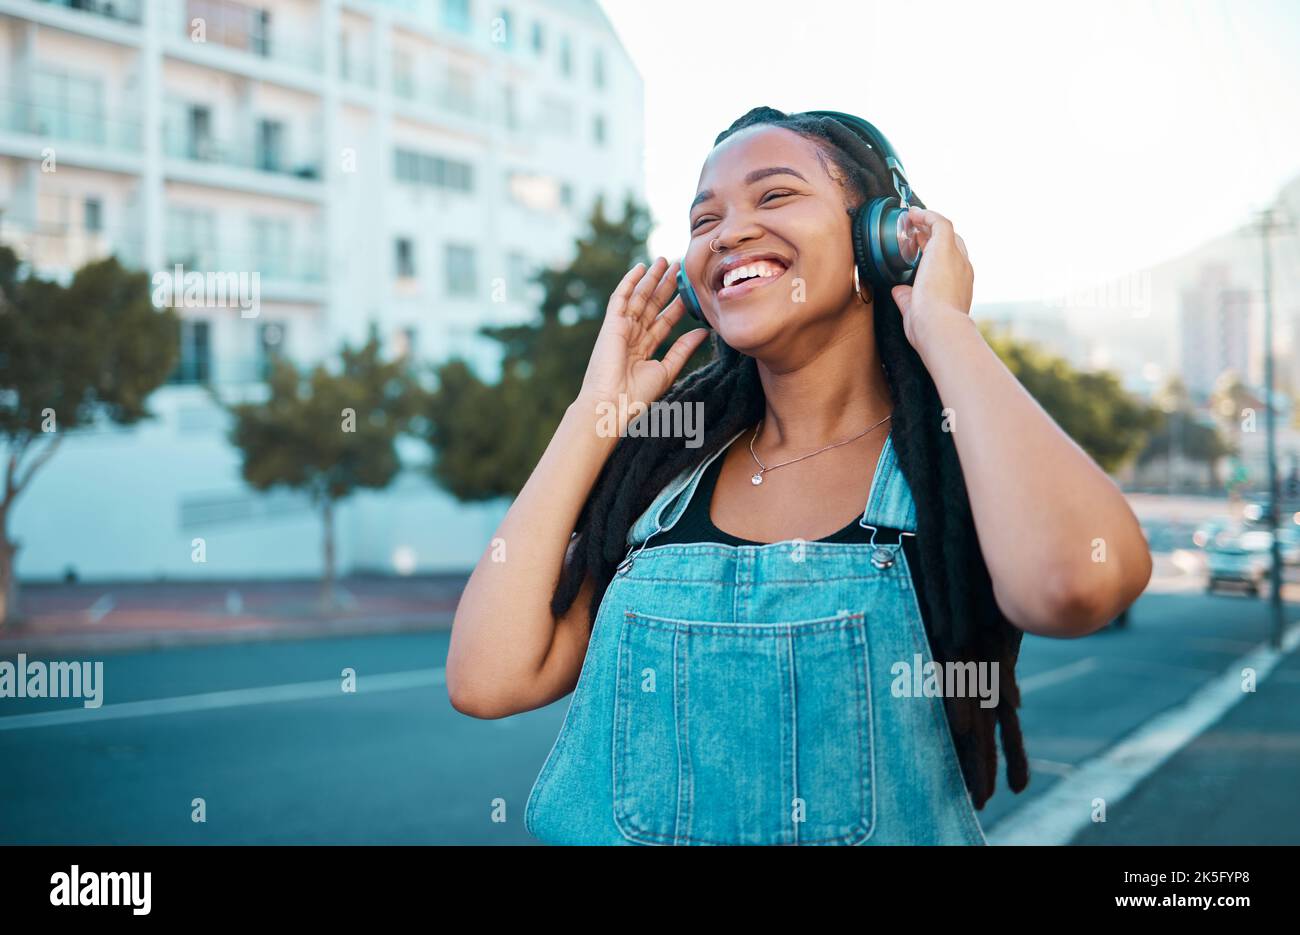 Music headphone city streaming, happy and black woman smile outdoor from Atlanta. Happiness of a person feeling relax freedom and cheerful mindset Stock Photo